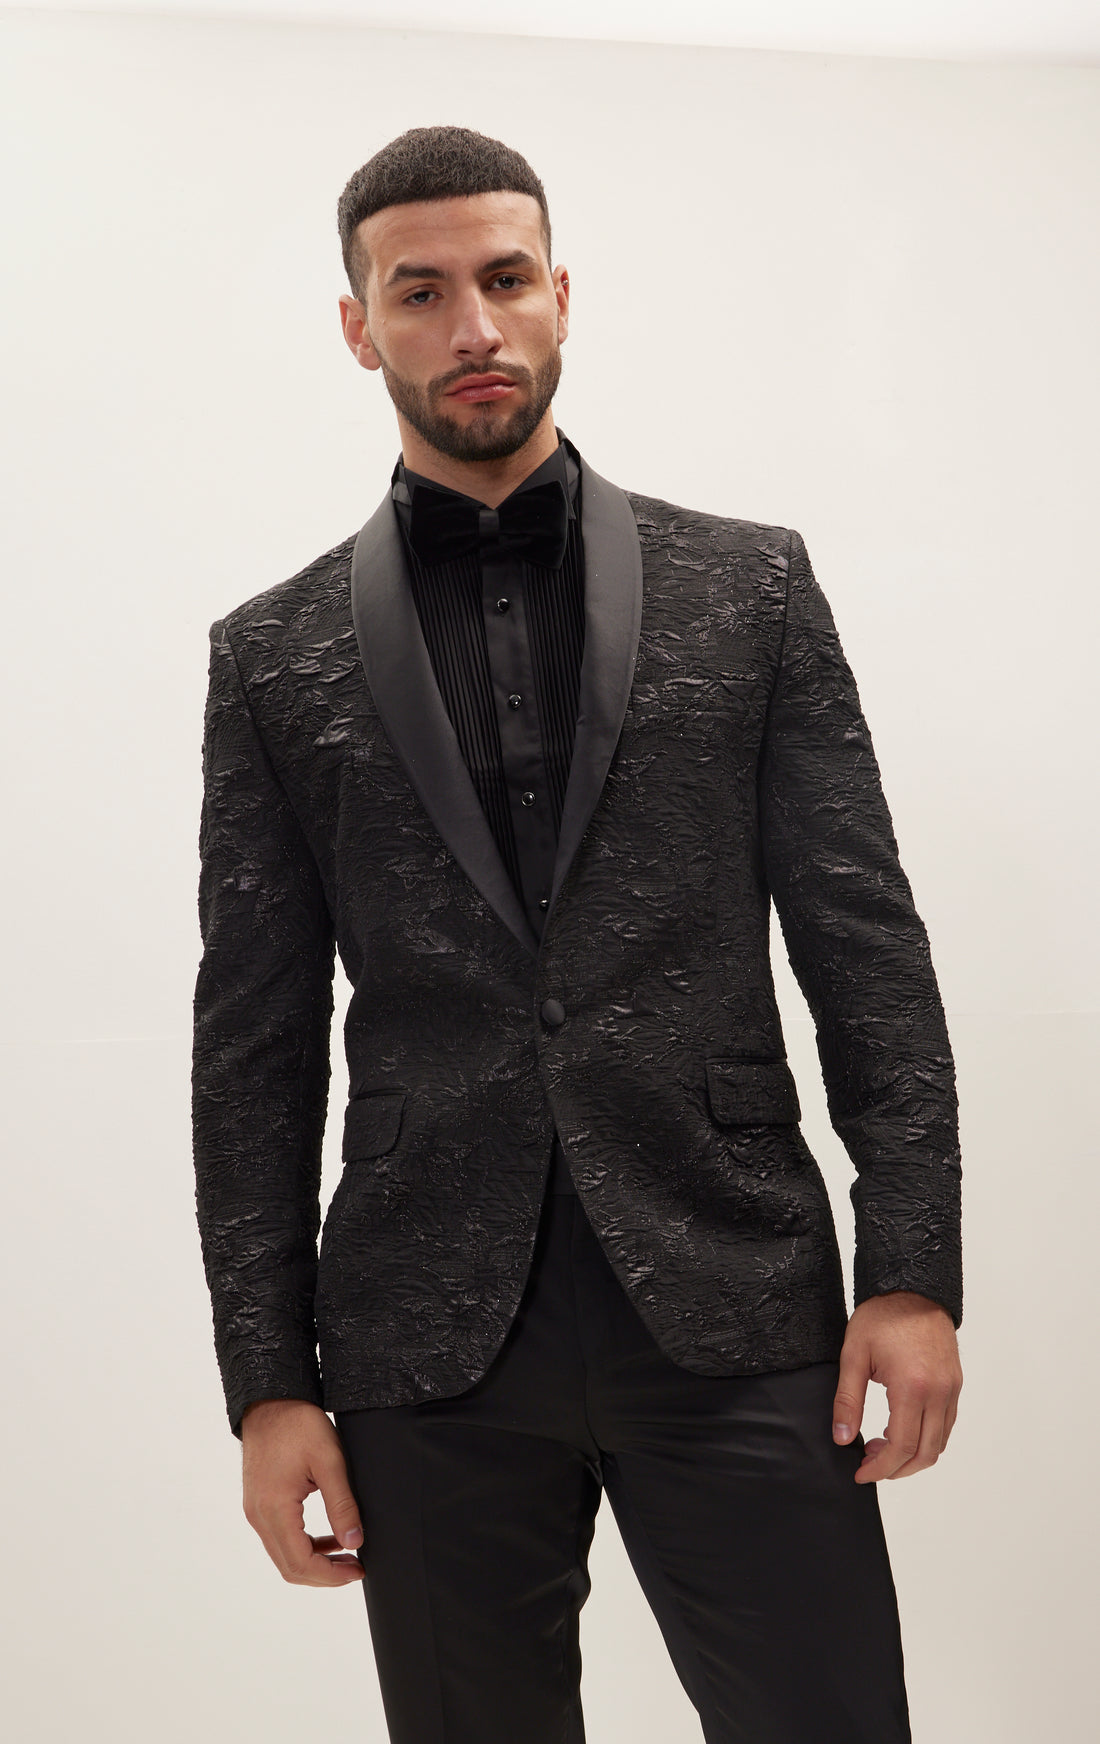 Embroidered Quilt Patterns Shawl Lapel Tuxedo Jacket - Black Silver